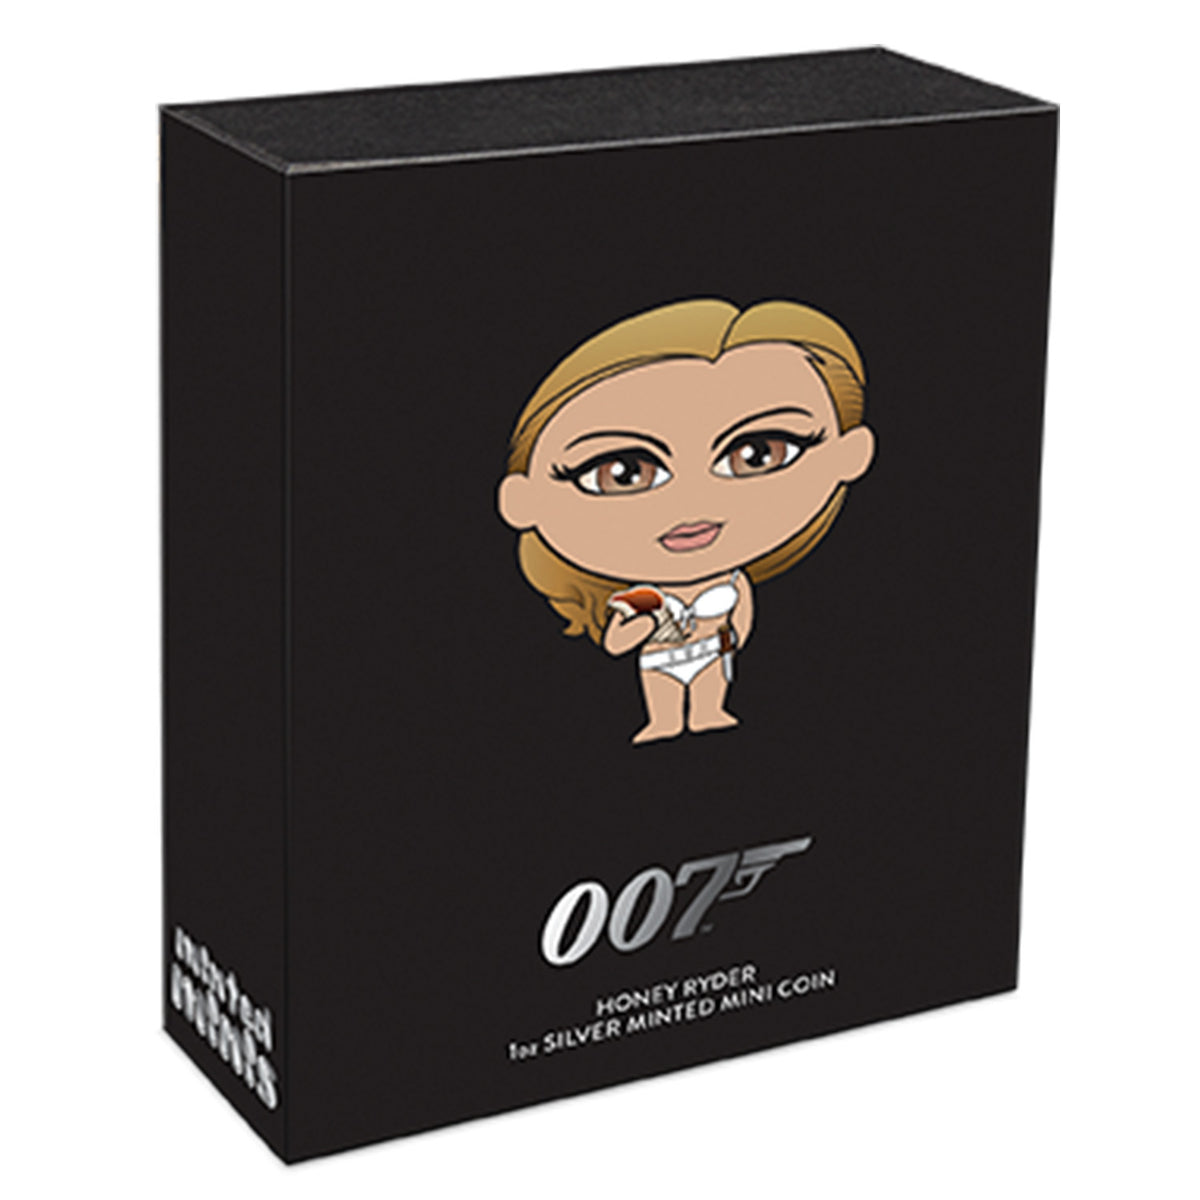 James Bond Honey Ryder 1oz Silver Minted Mini Coin - Numbered Edition - By The Perth Mint